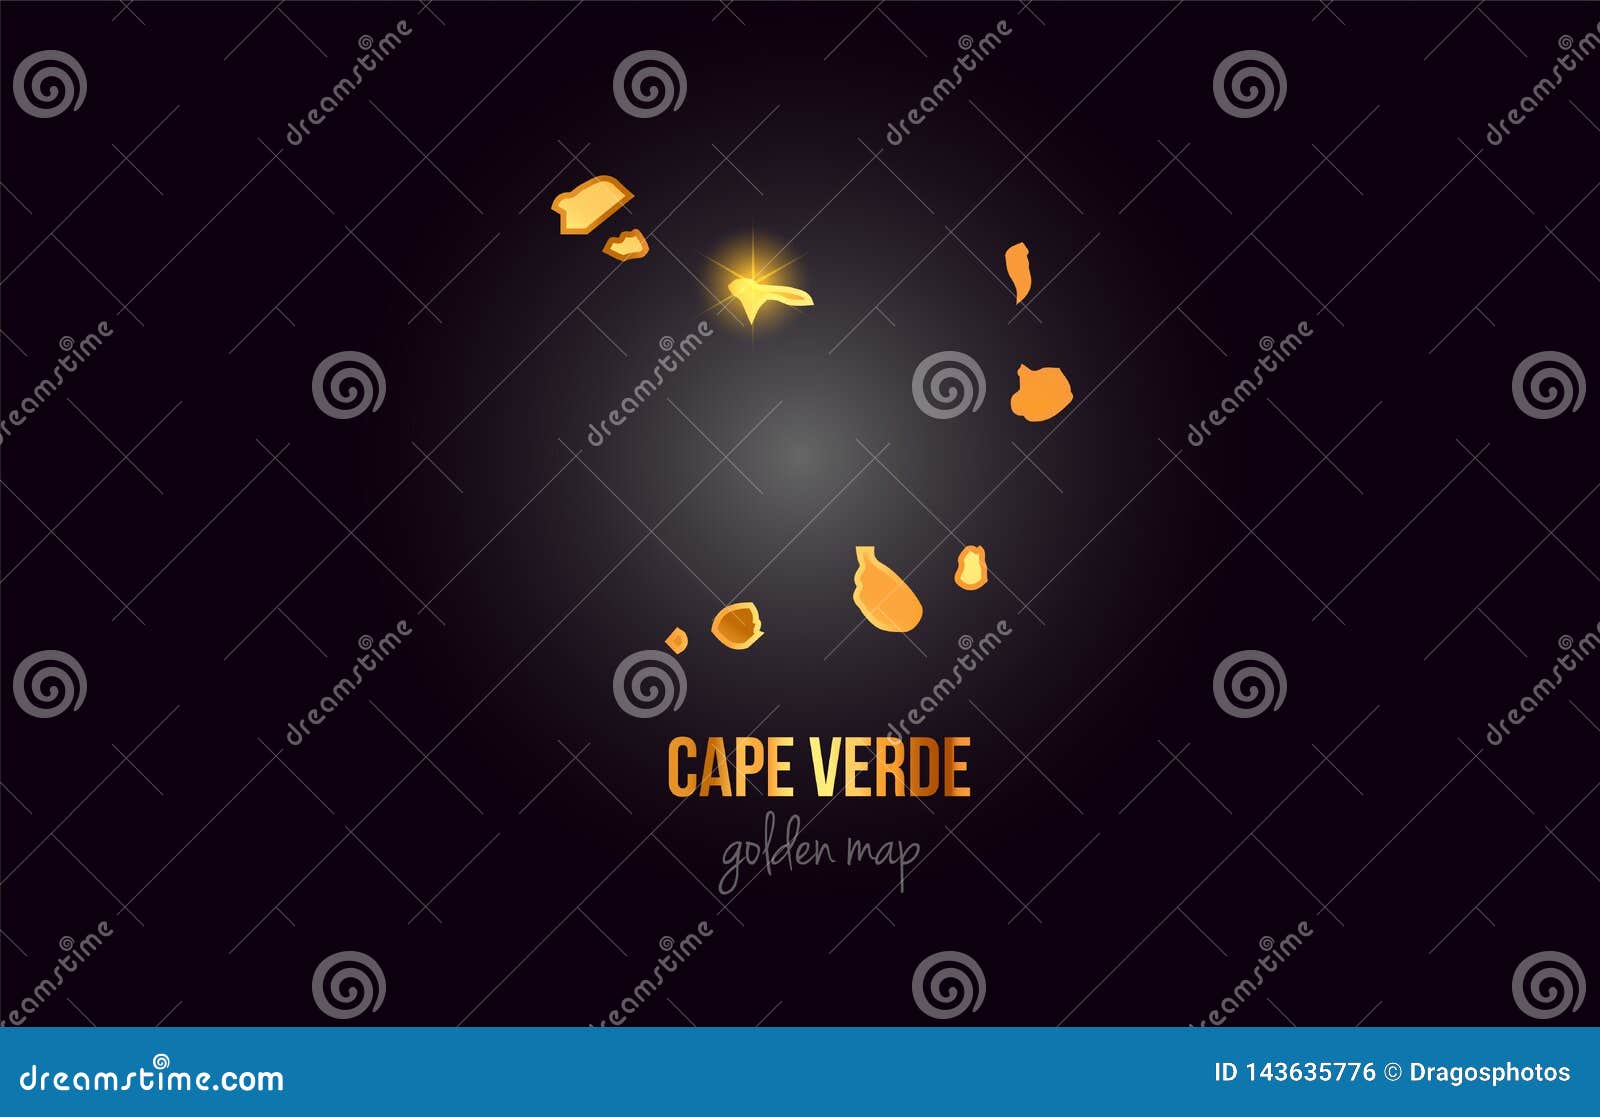 cape verde country border map in gold golden metal color 